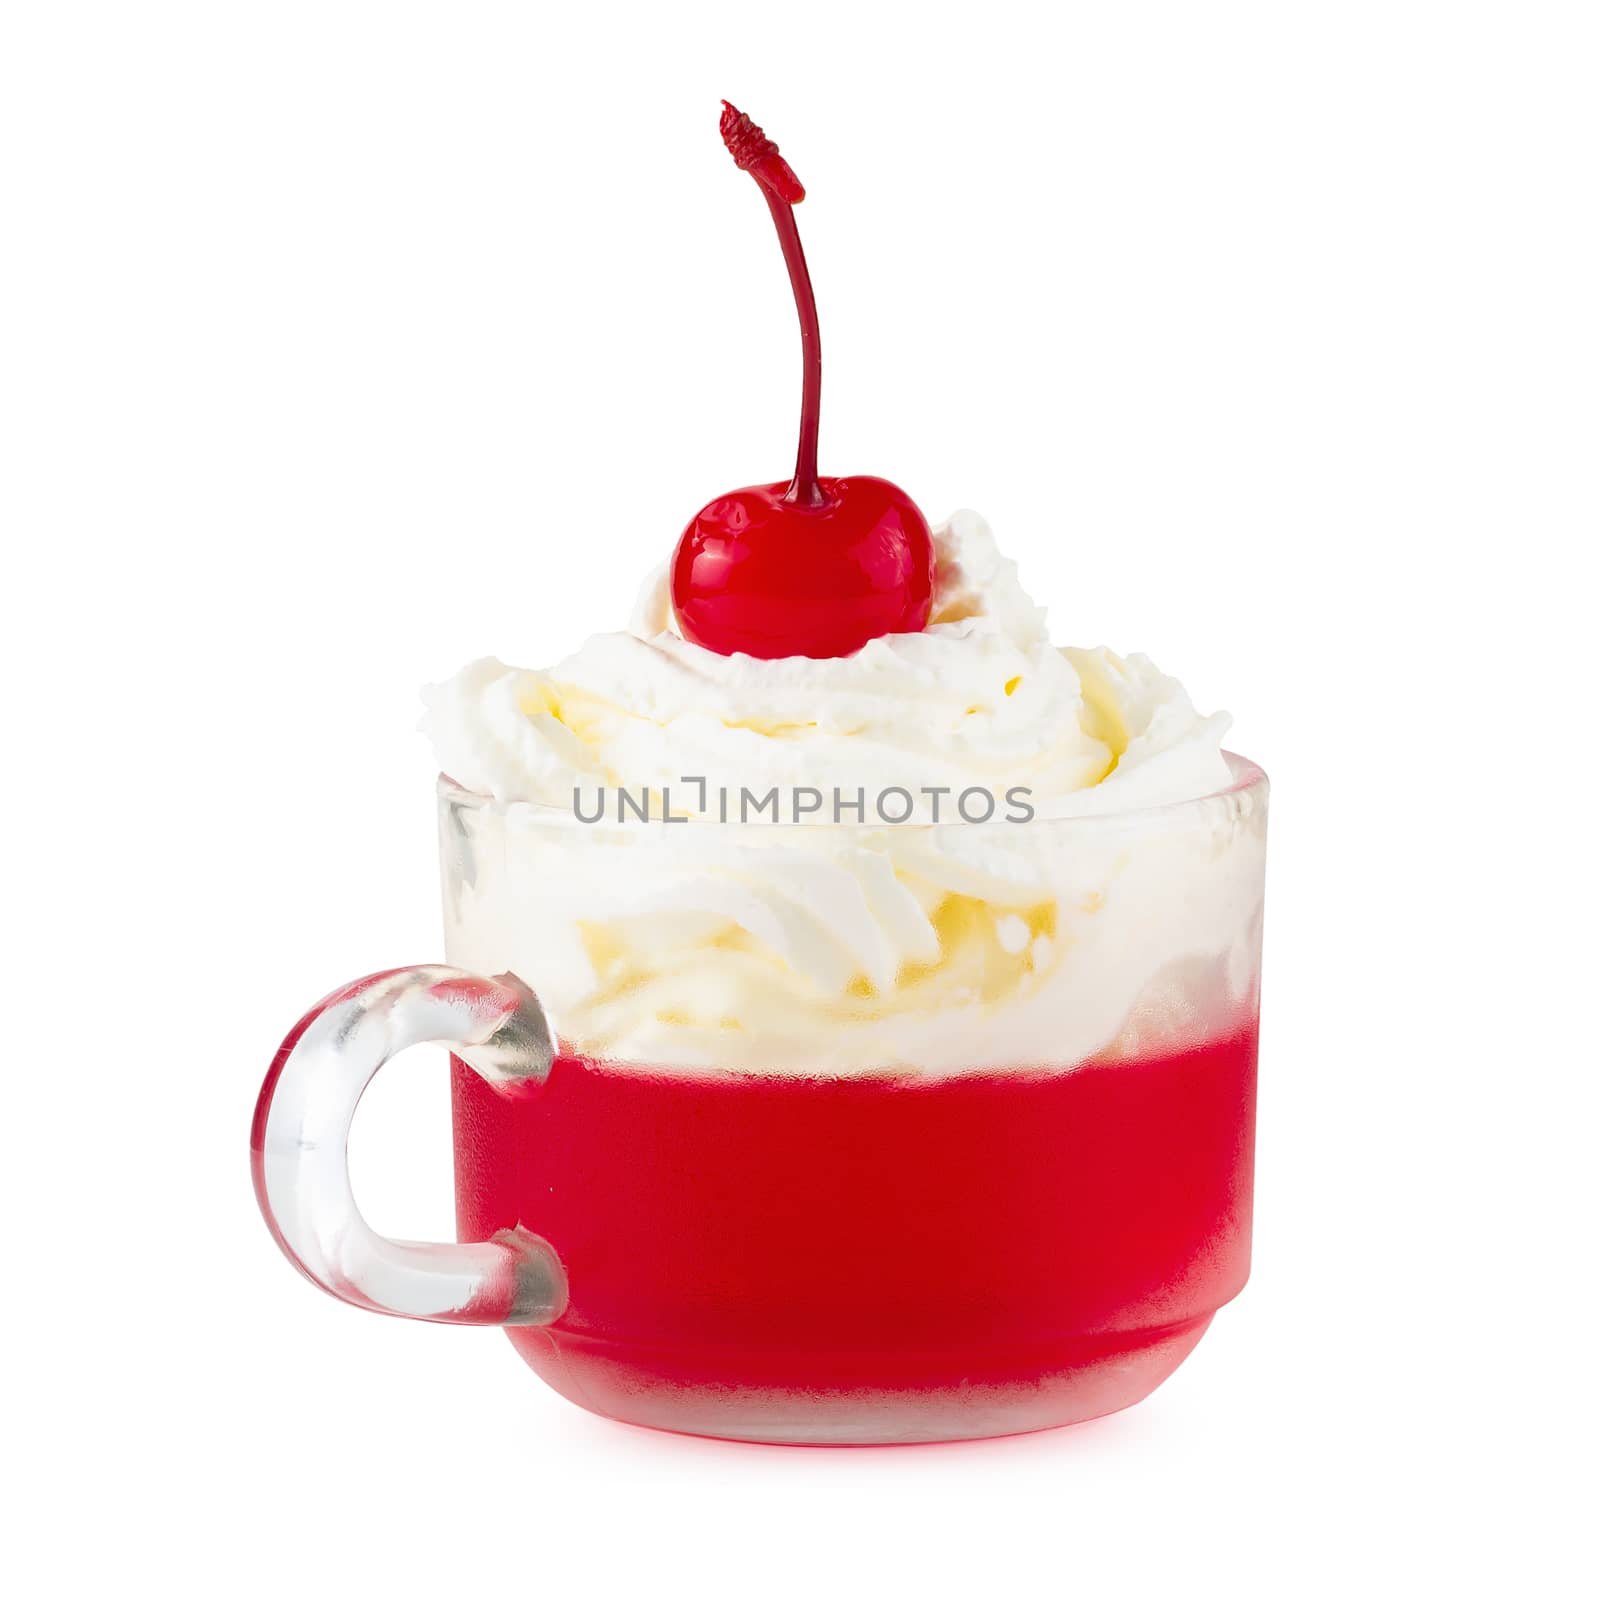 Strawberry jelly in a glass topping with cherries and whipped cream isolated on white background.